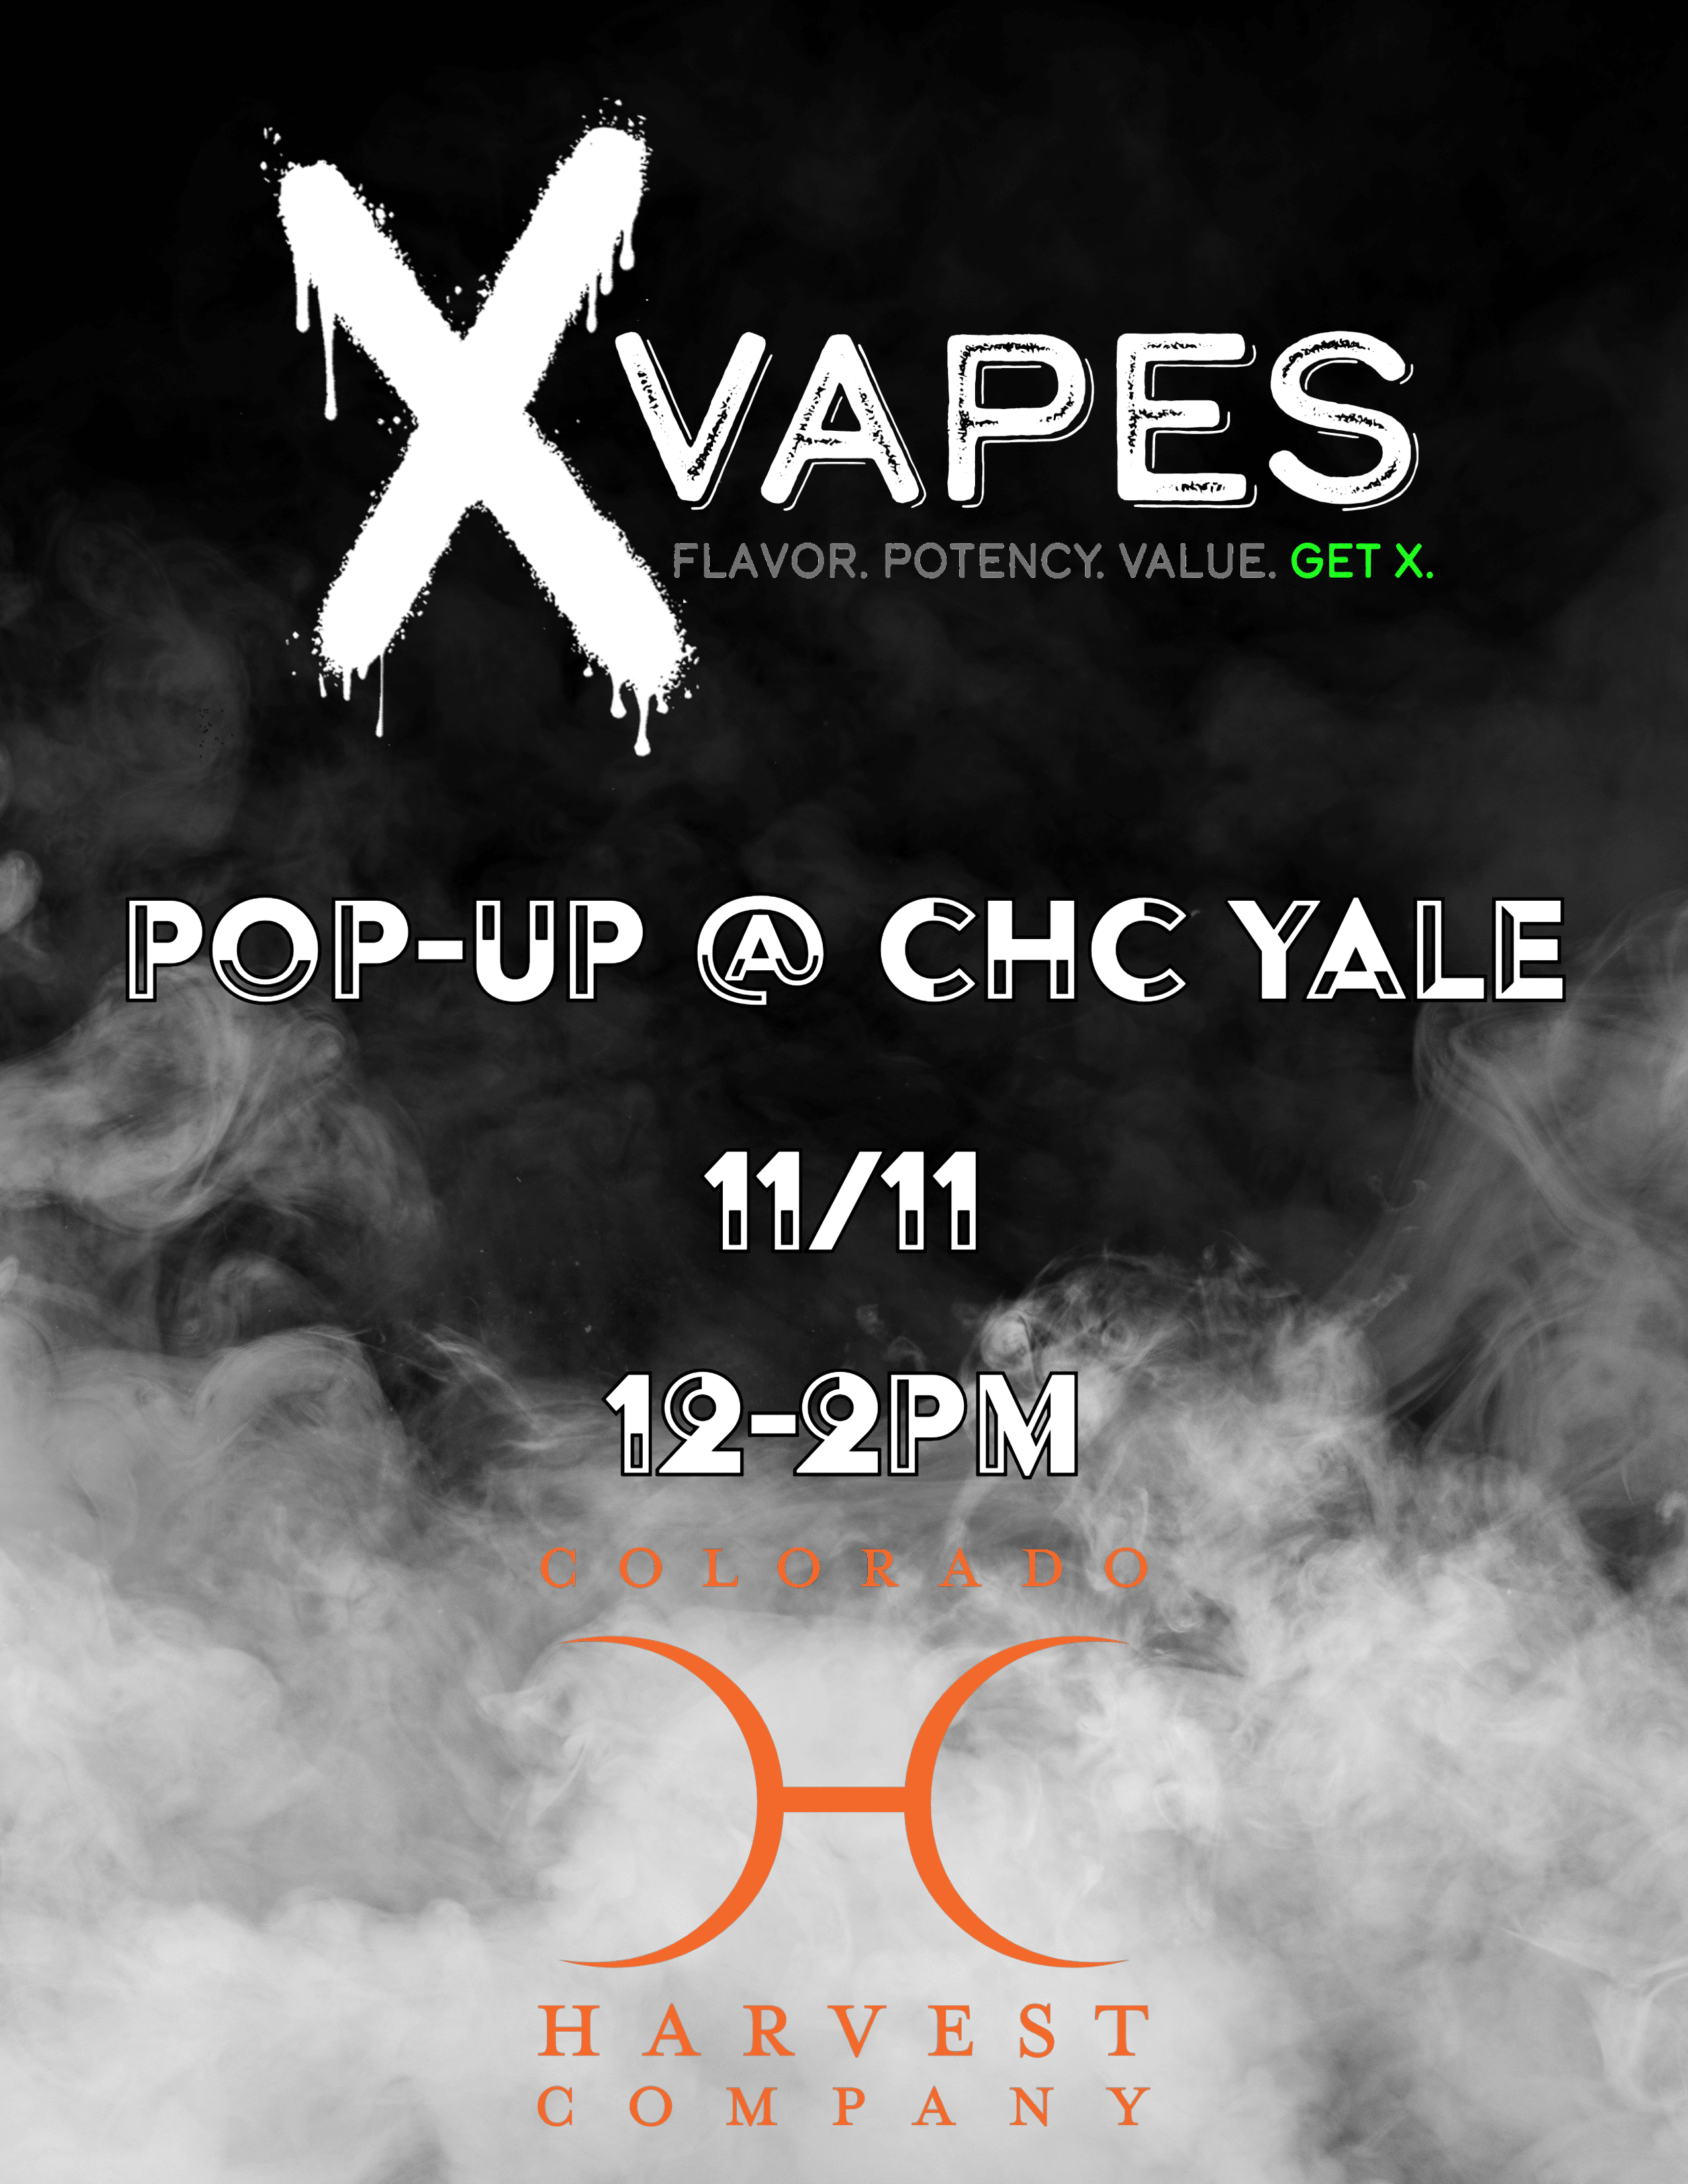 X Vapes Pop-up at Colorado Harvest Company Yale Location on 11.11 from 12-2pm. Get a penny X Vapes battery with purchase.